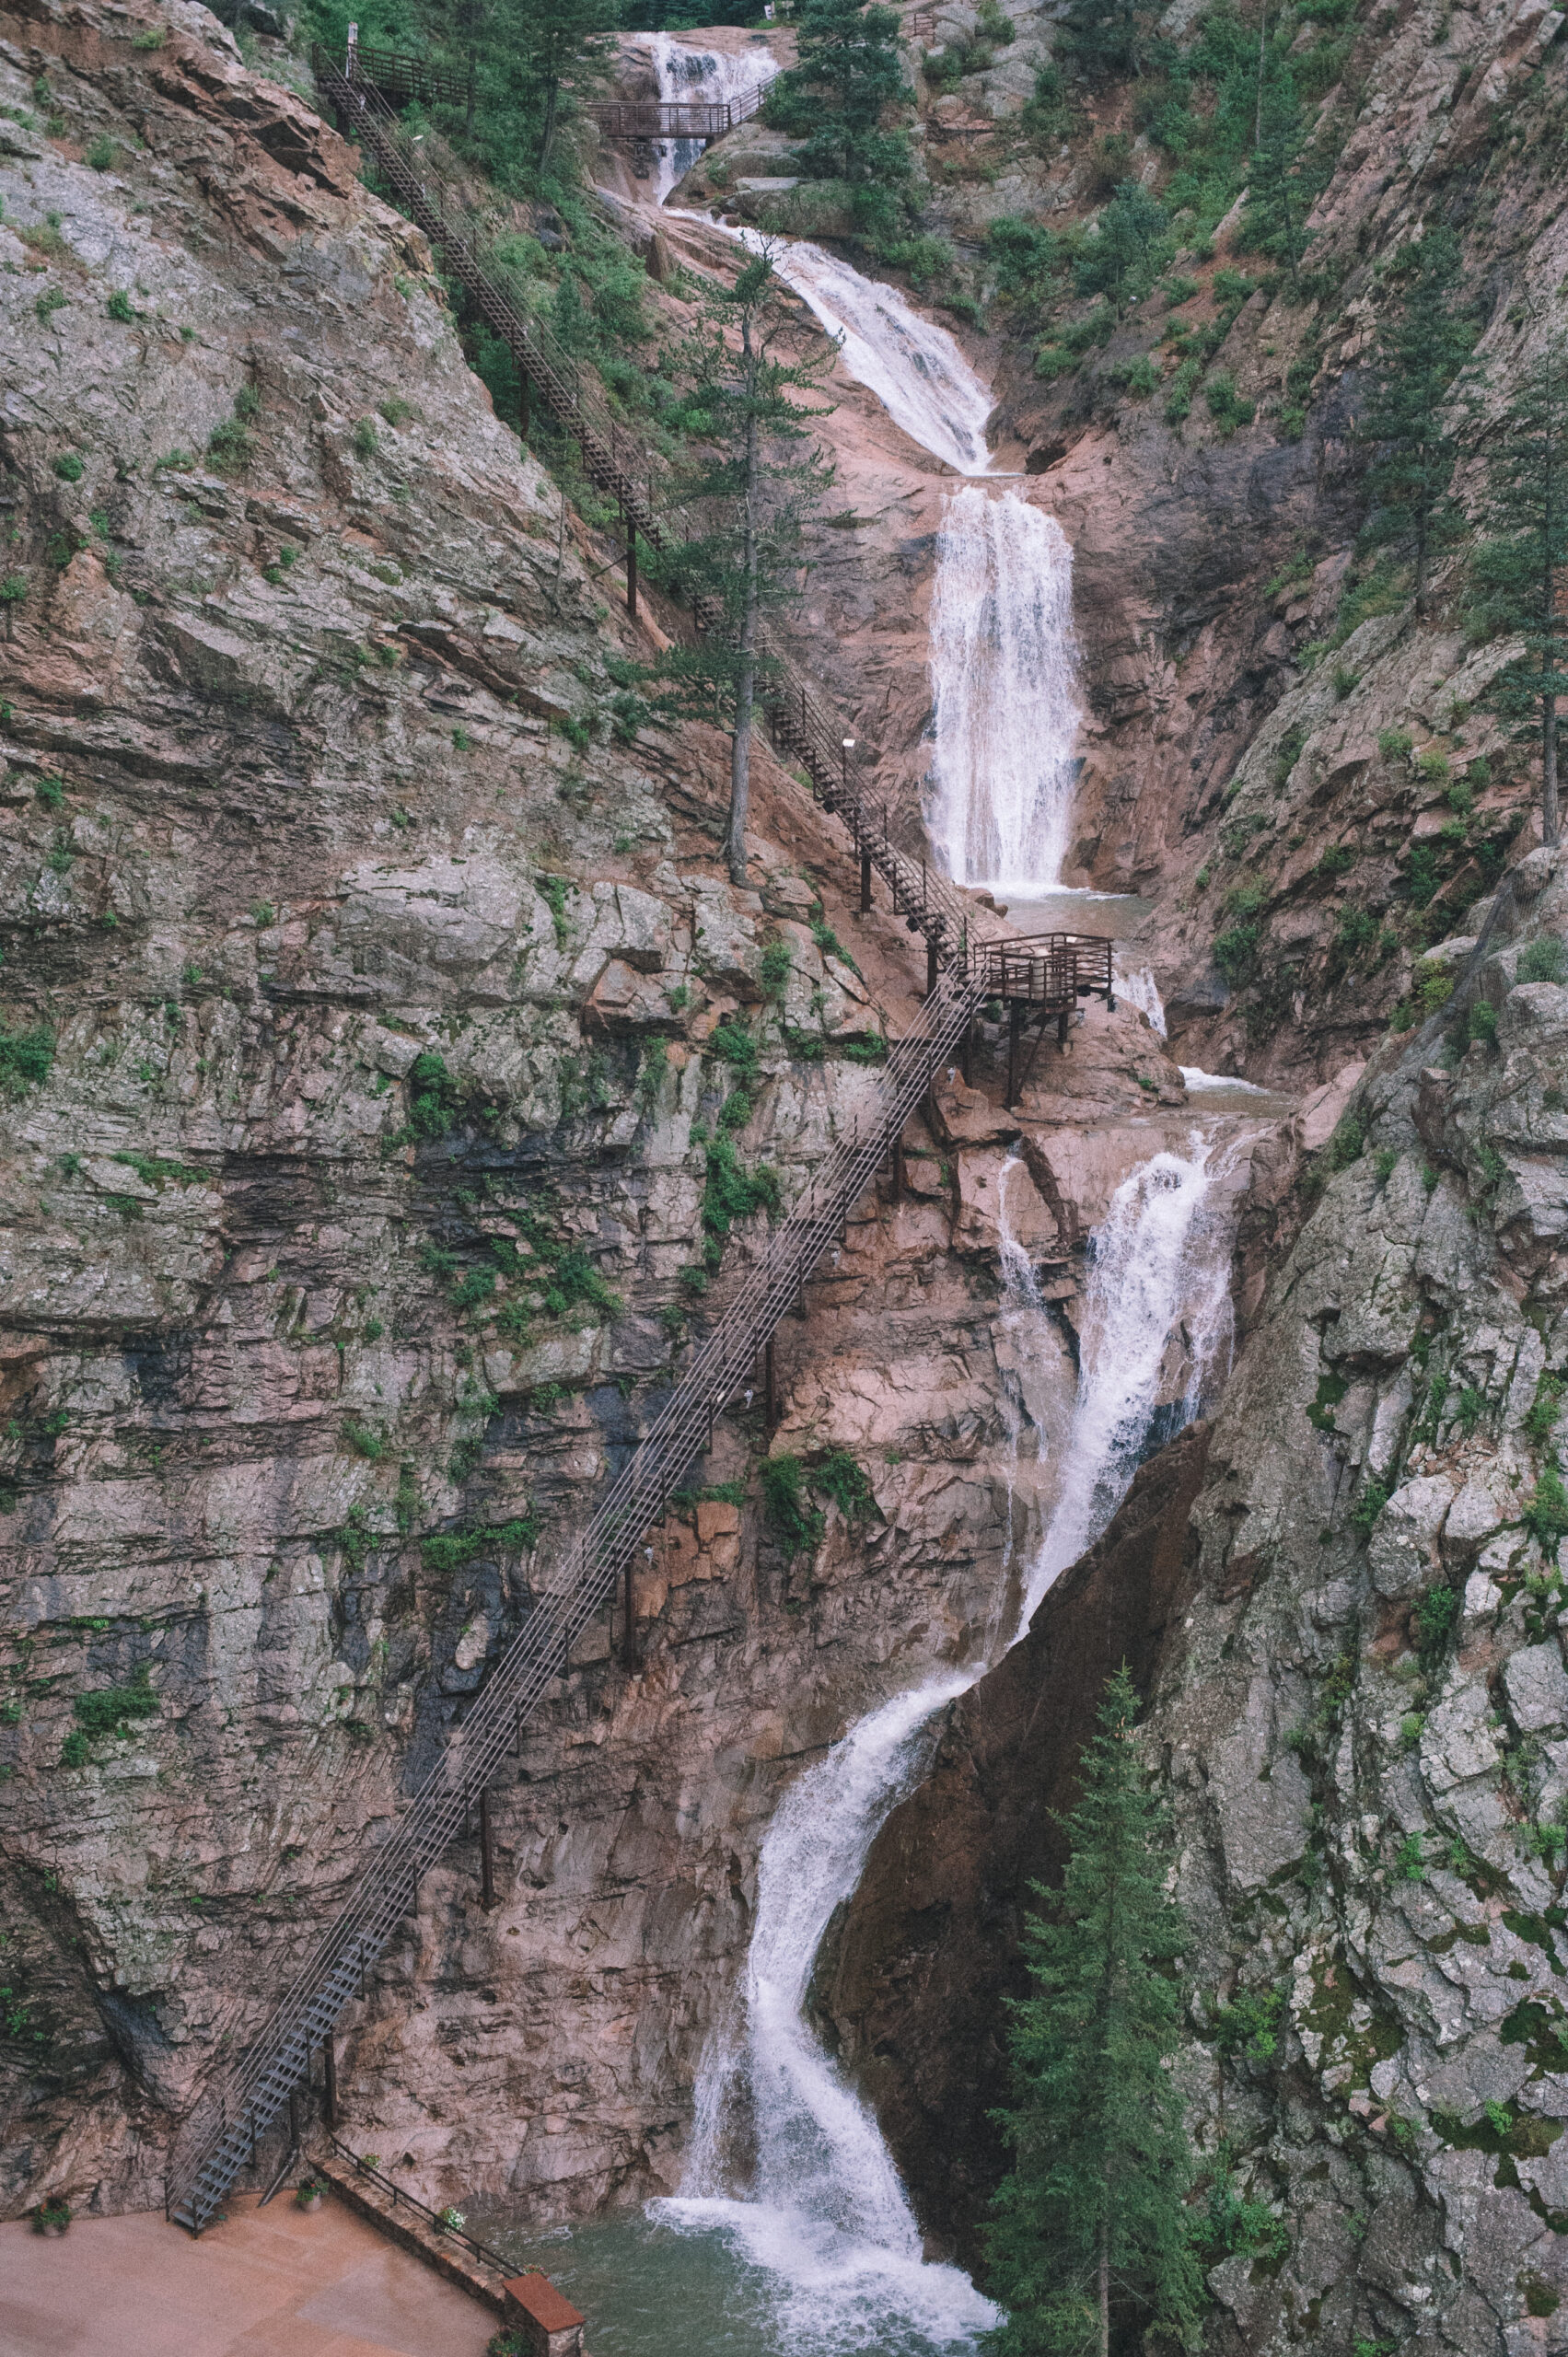 The Seven Falls, a tall series of waterfalls, near The Broadmoor in Colorado